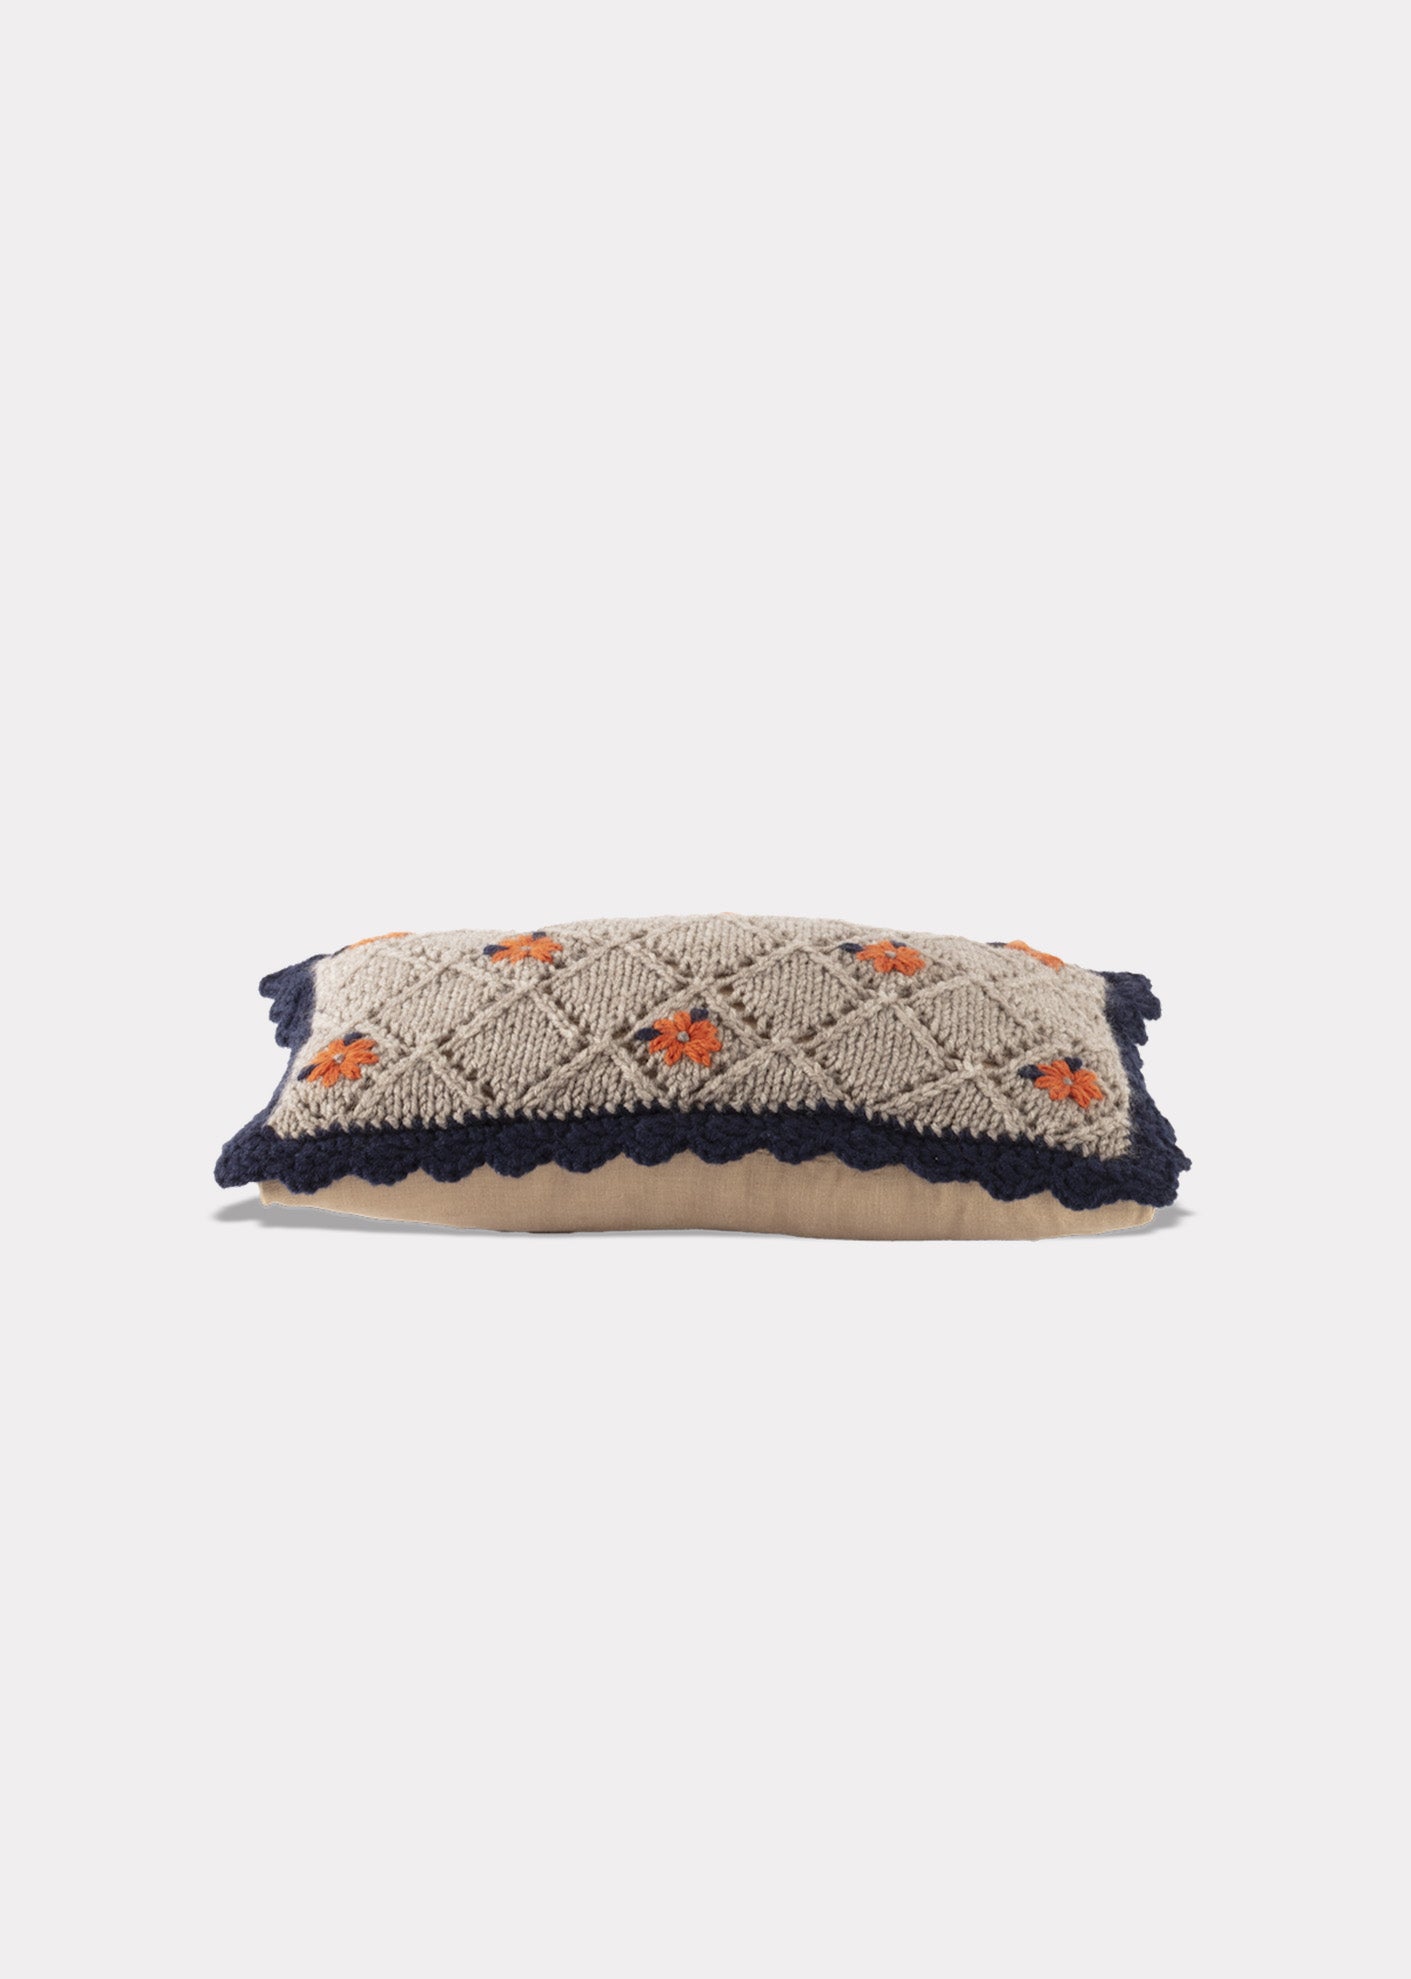 EMBROIDERED KNIT SCATTER CUSHION 30X30CM - GREY/RED MULTI